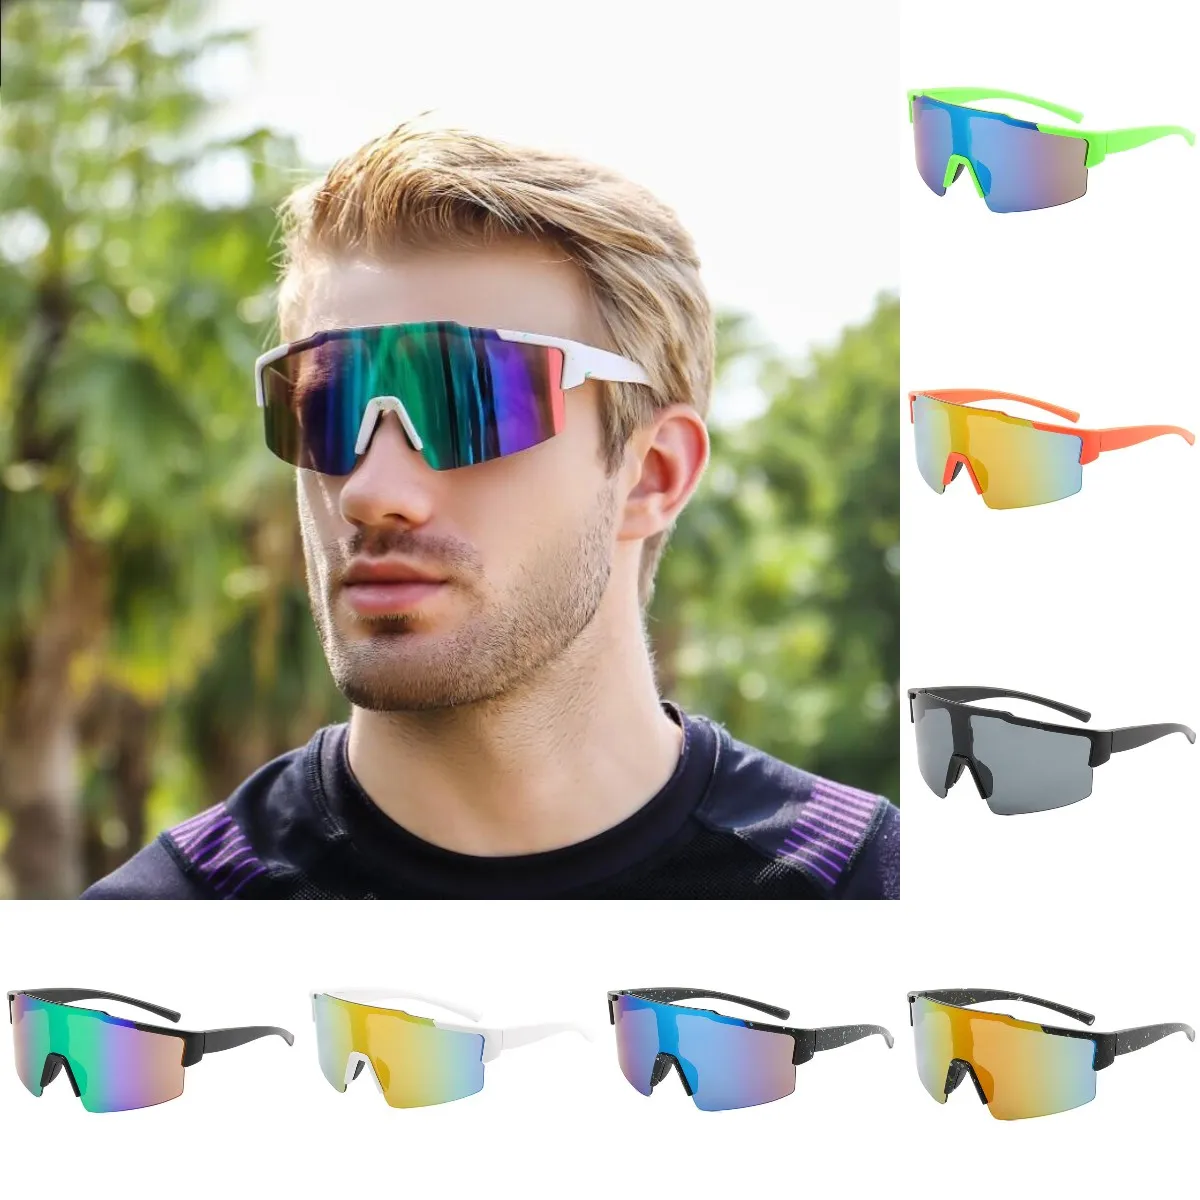 UV400 Cycling Sunglasses For Men And Women MTB Sport Cycling Goggles Over  Glasses In From Vivian5168, $3.27